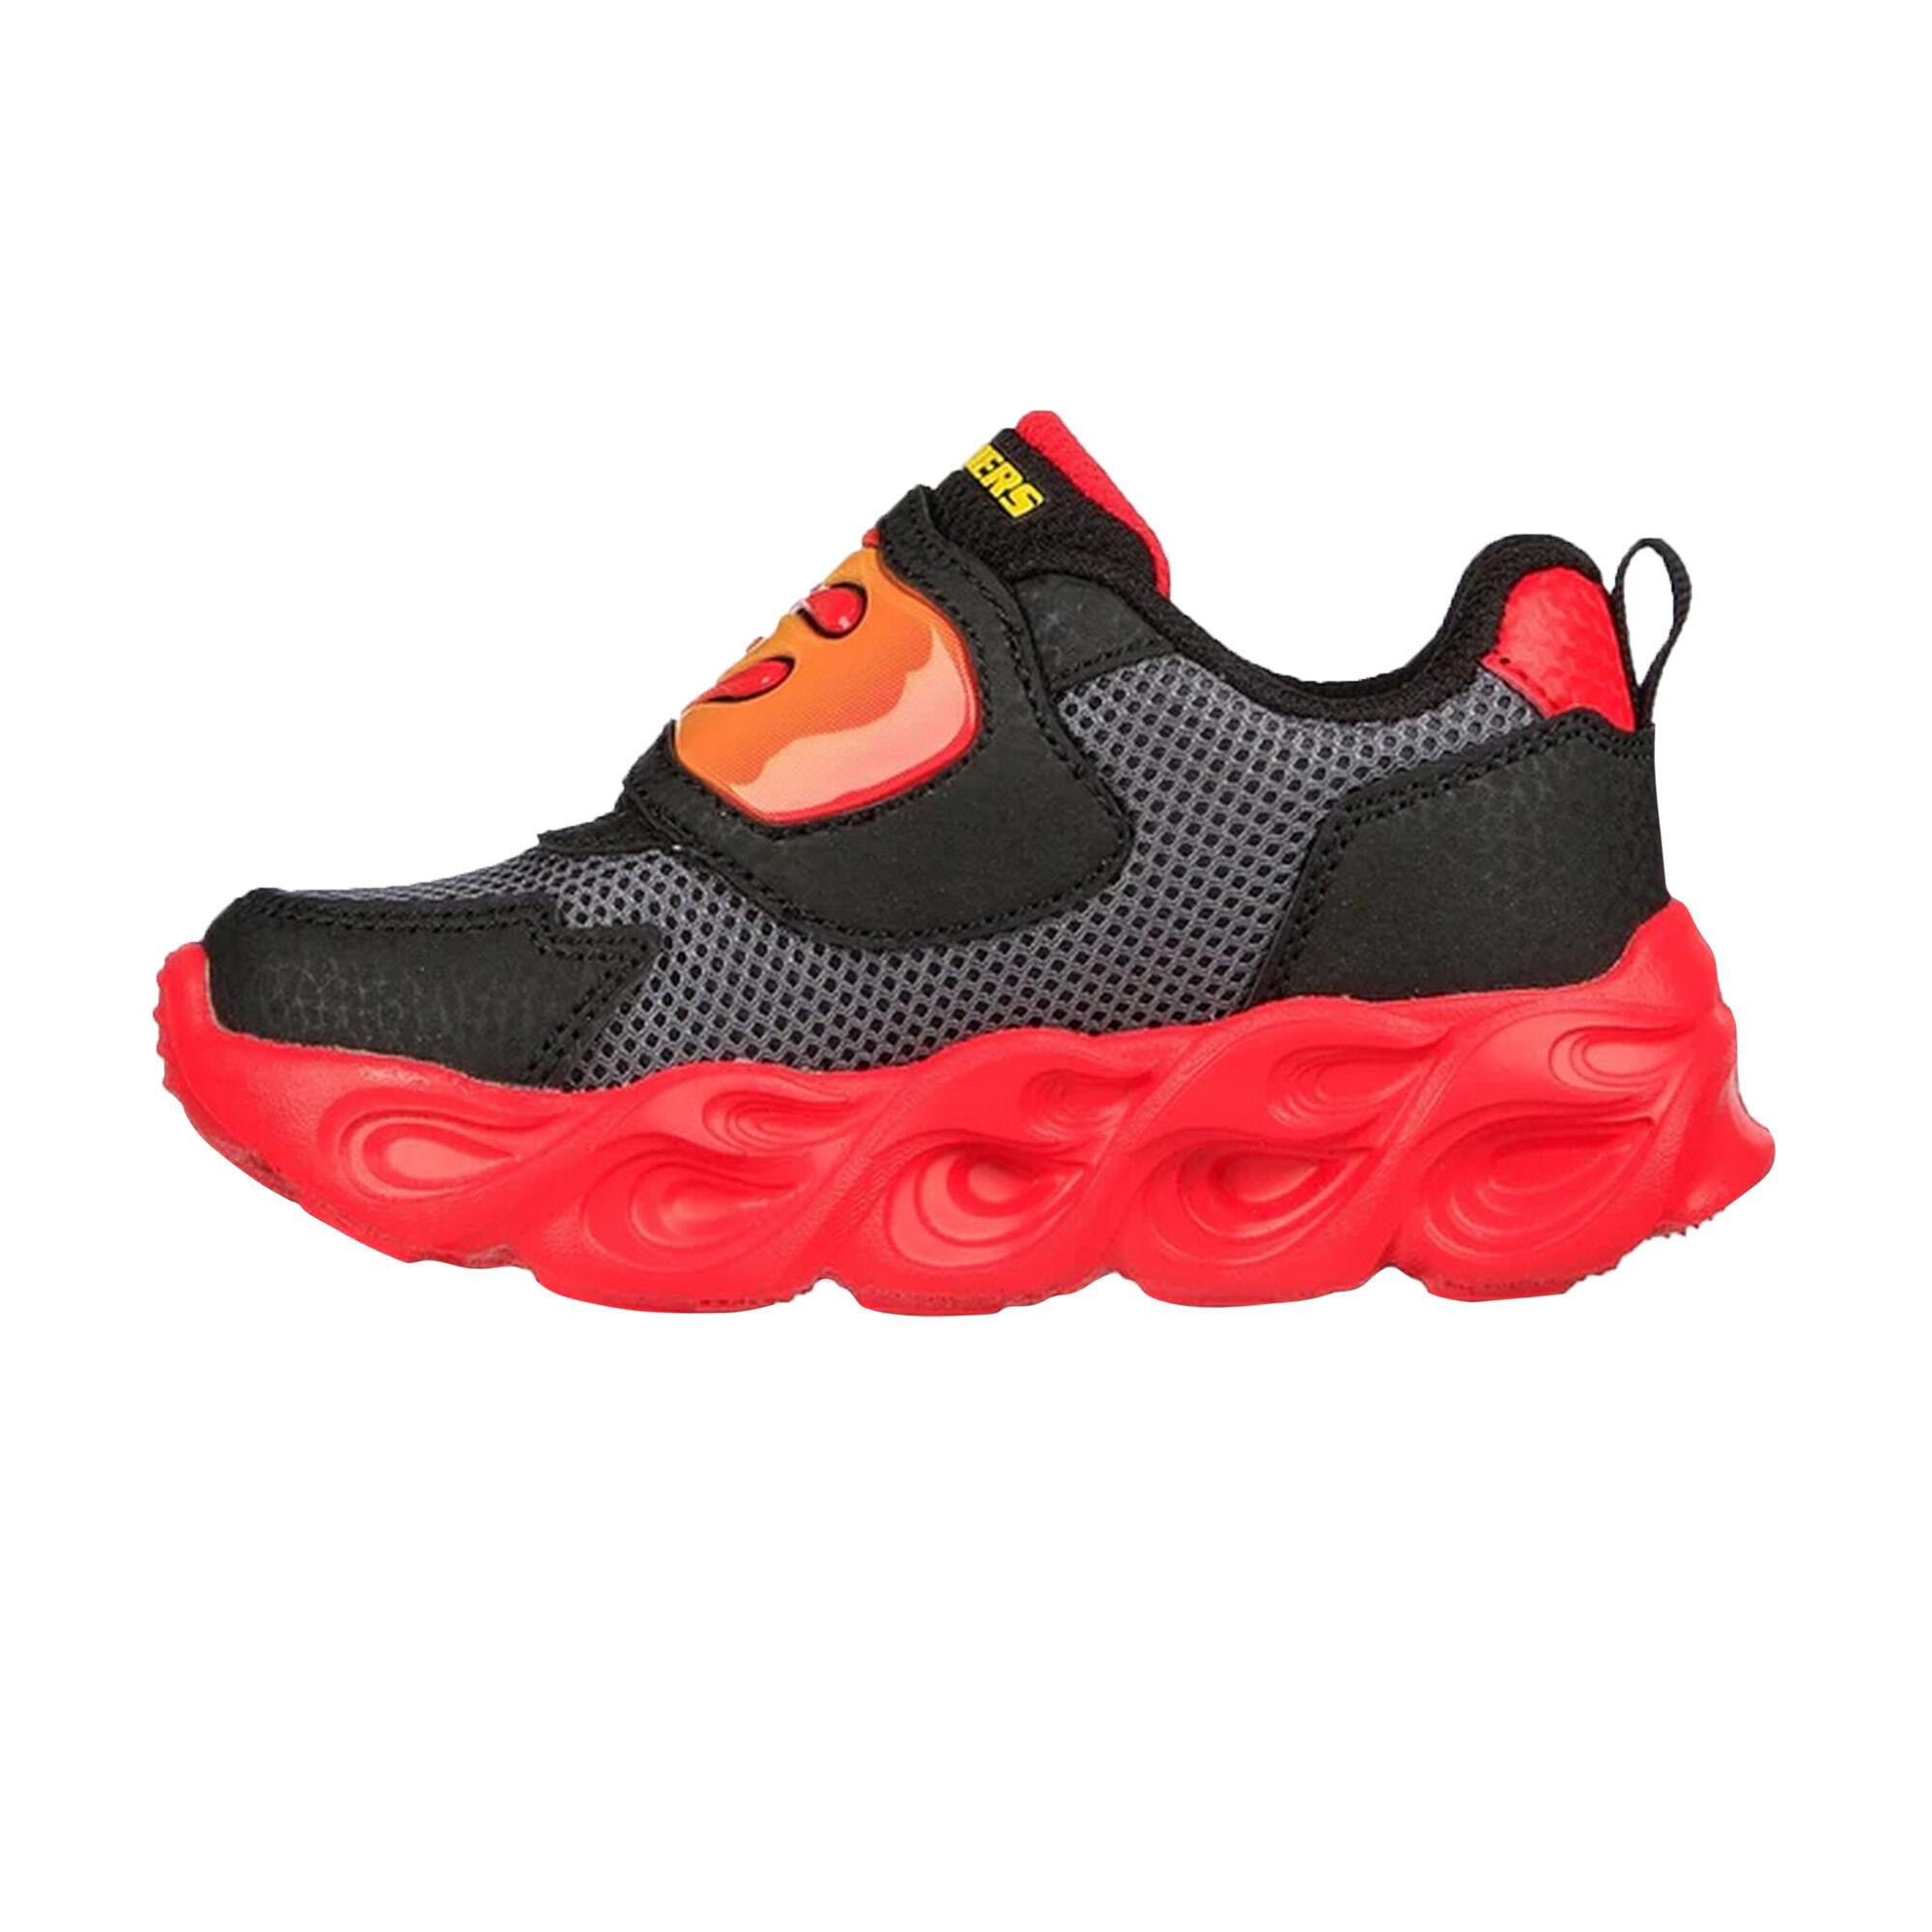 Boys ThermoFlash Flame Flow Trainers (Black/Red) 2/5